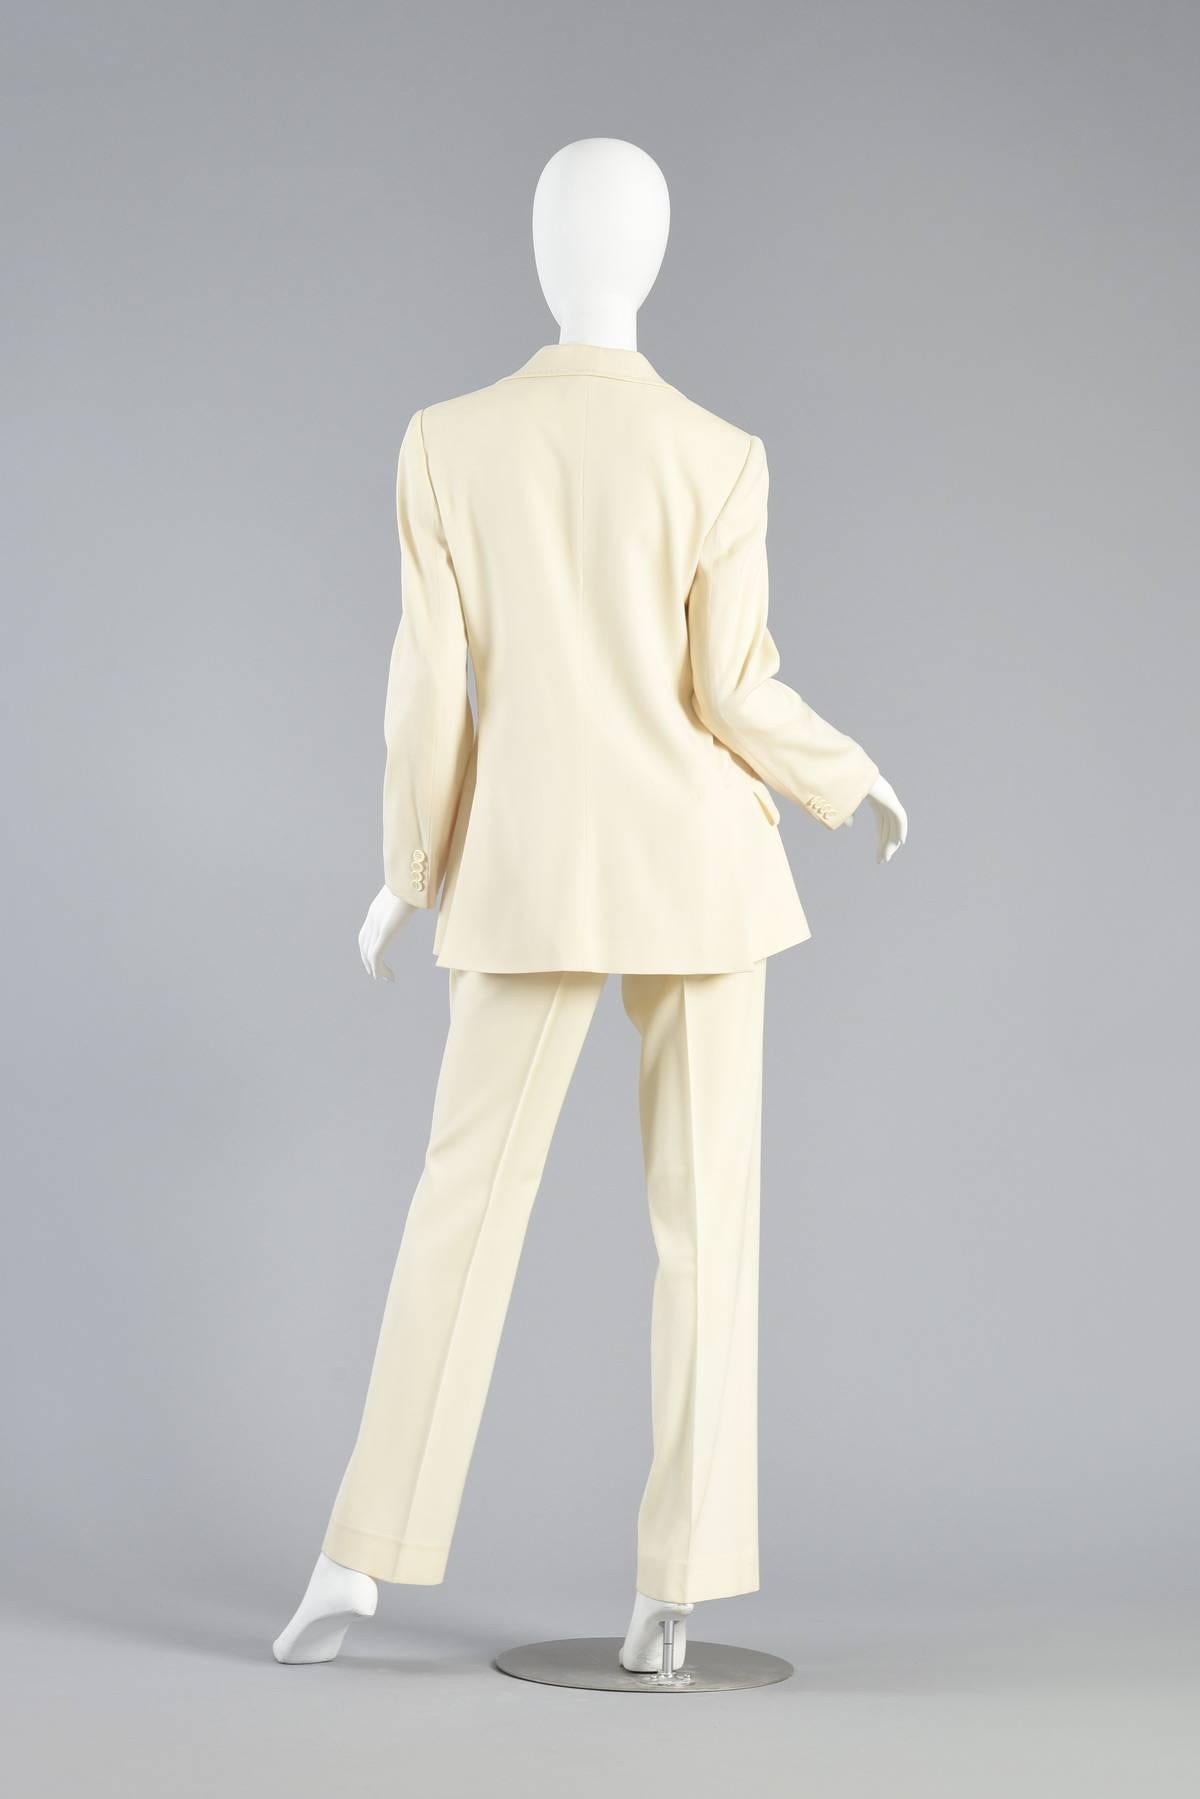 Dolce & Gabbana Ivory Tuxedo Suit For Sale 3